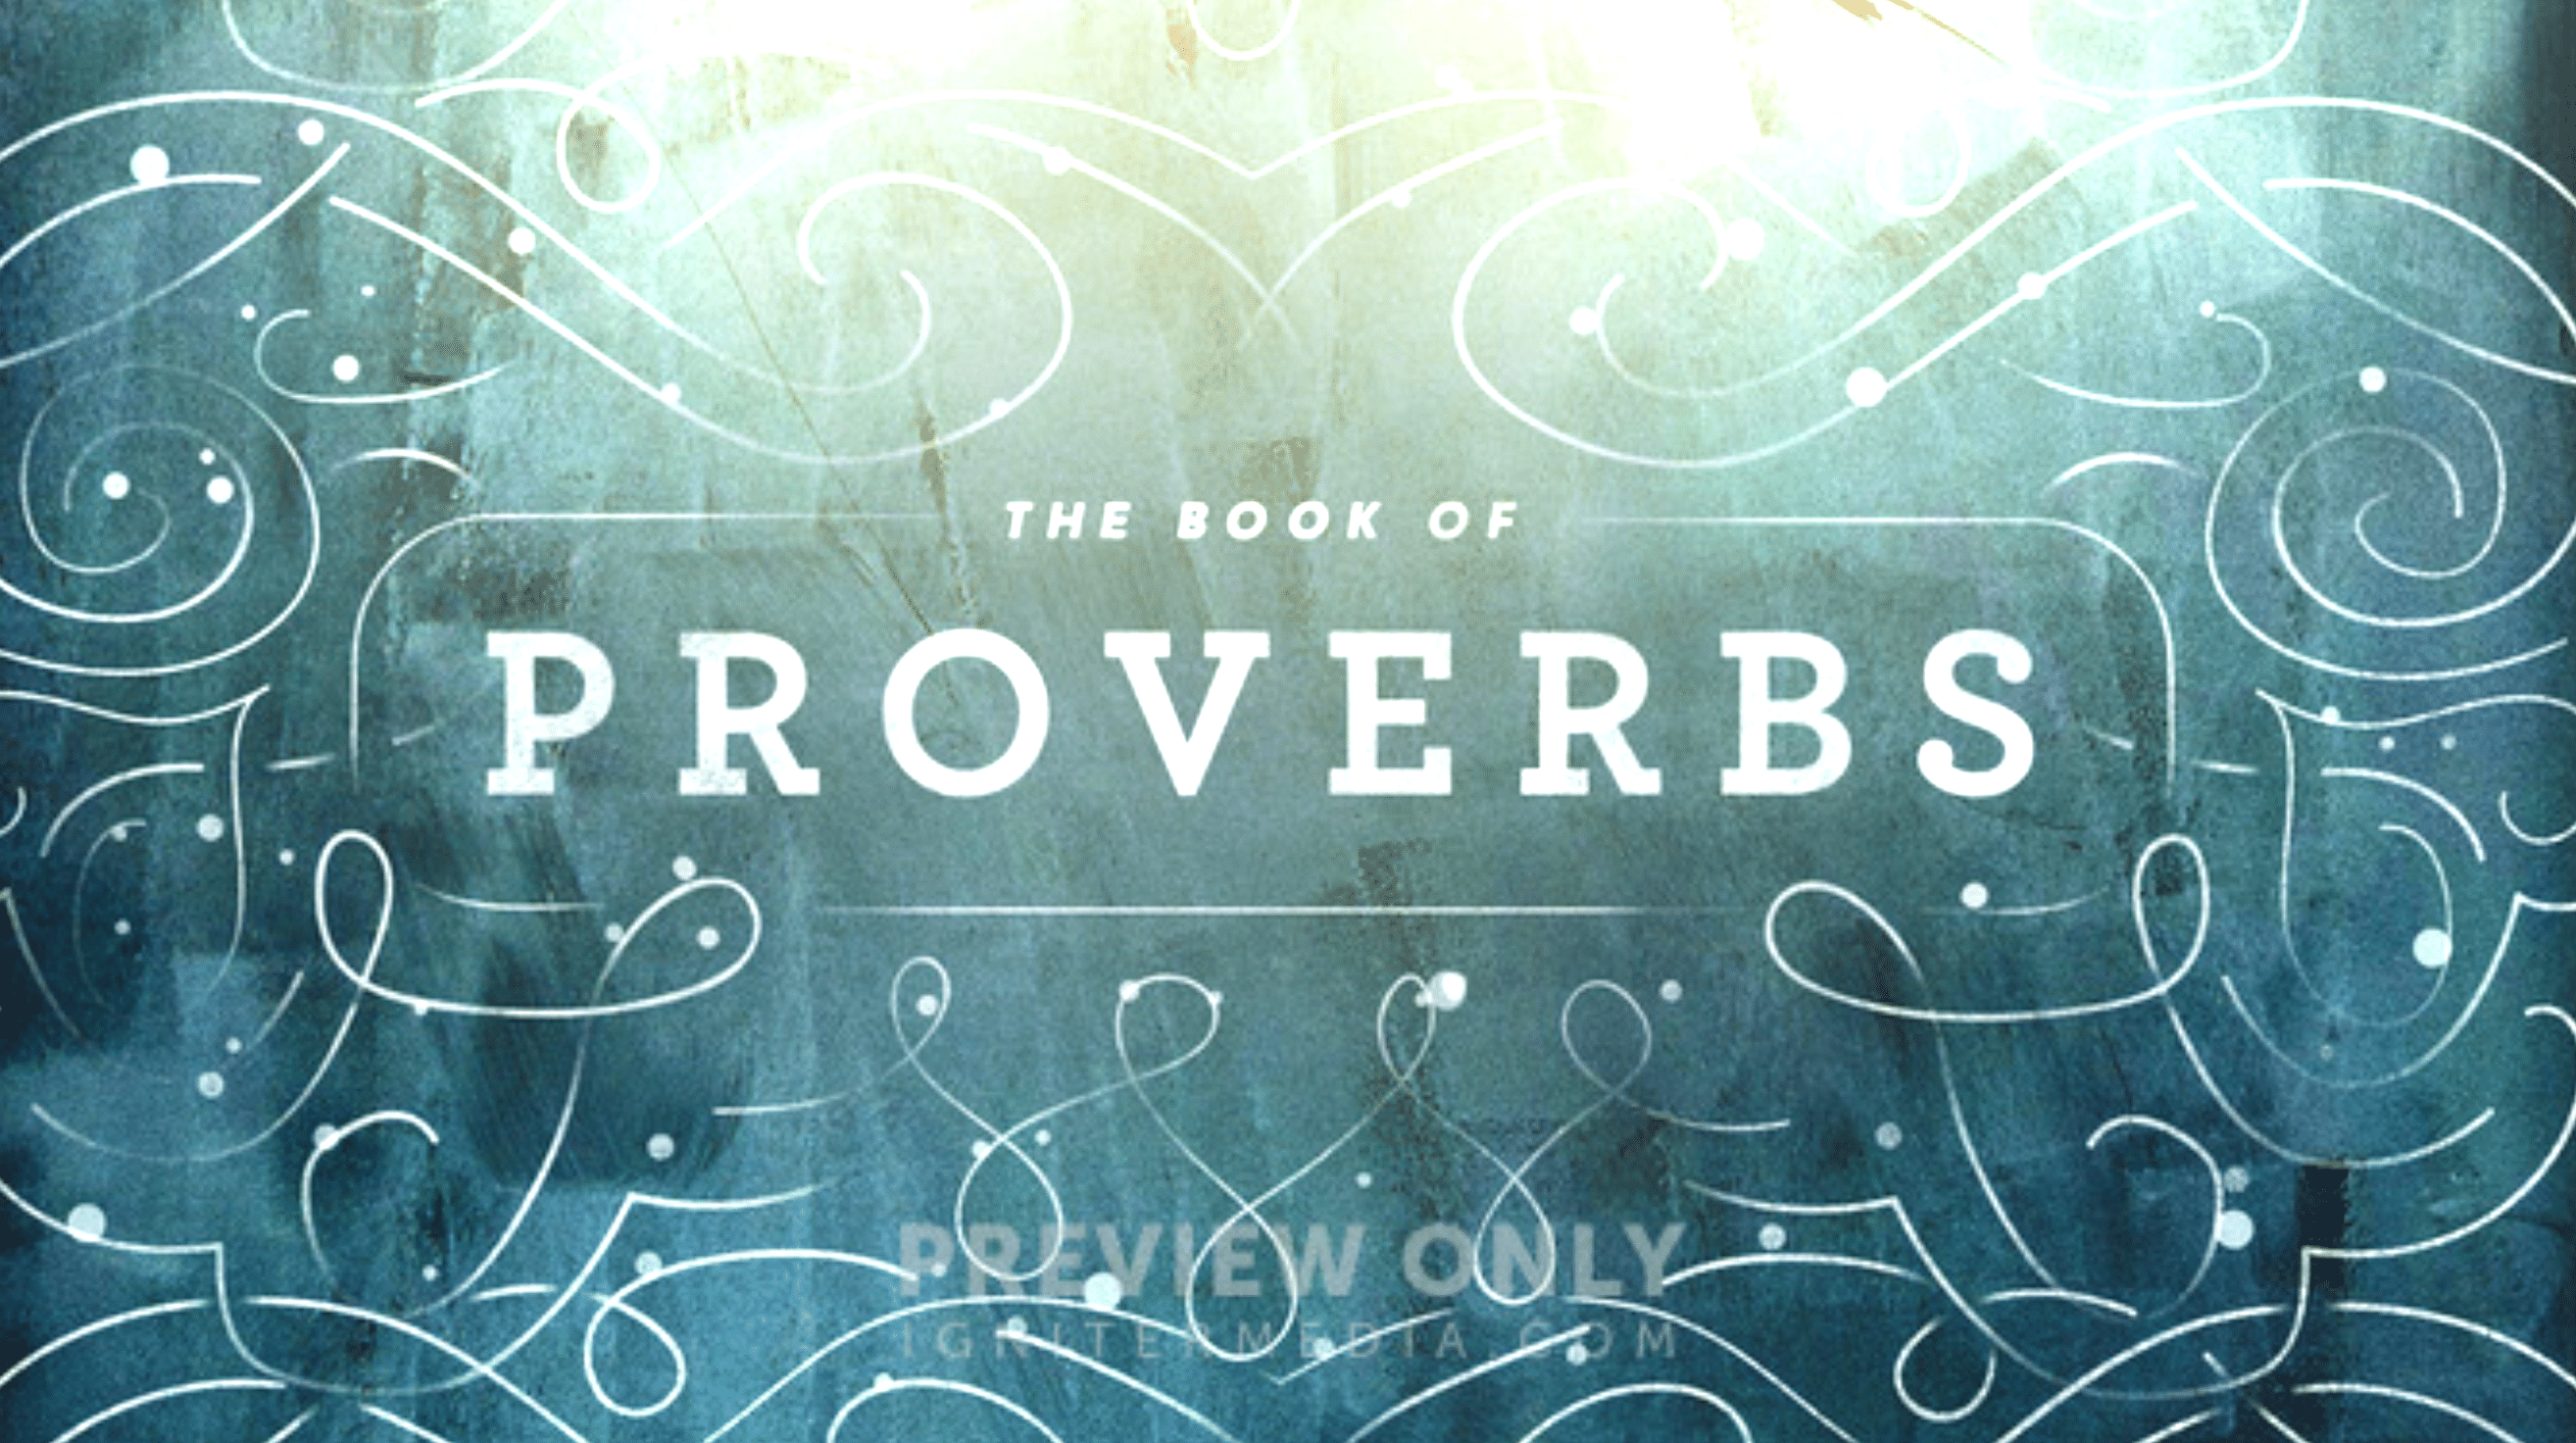 Proverbs, Wisdom & Our Words (Keslinger)